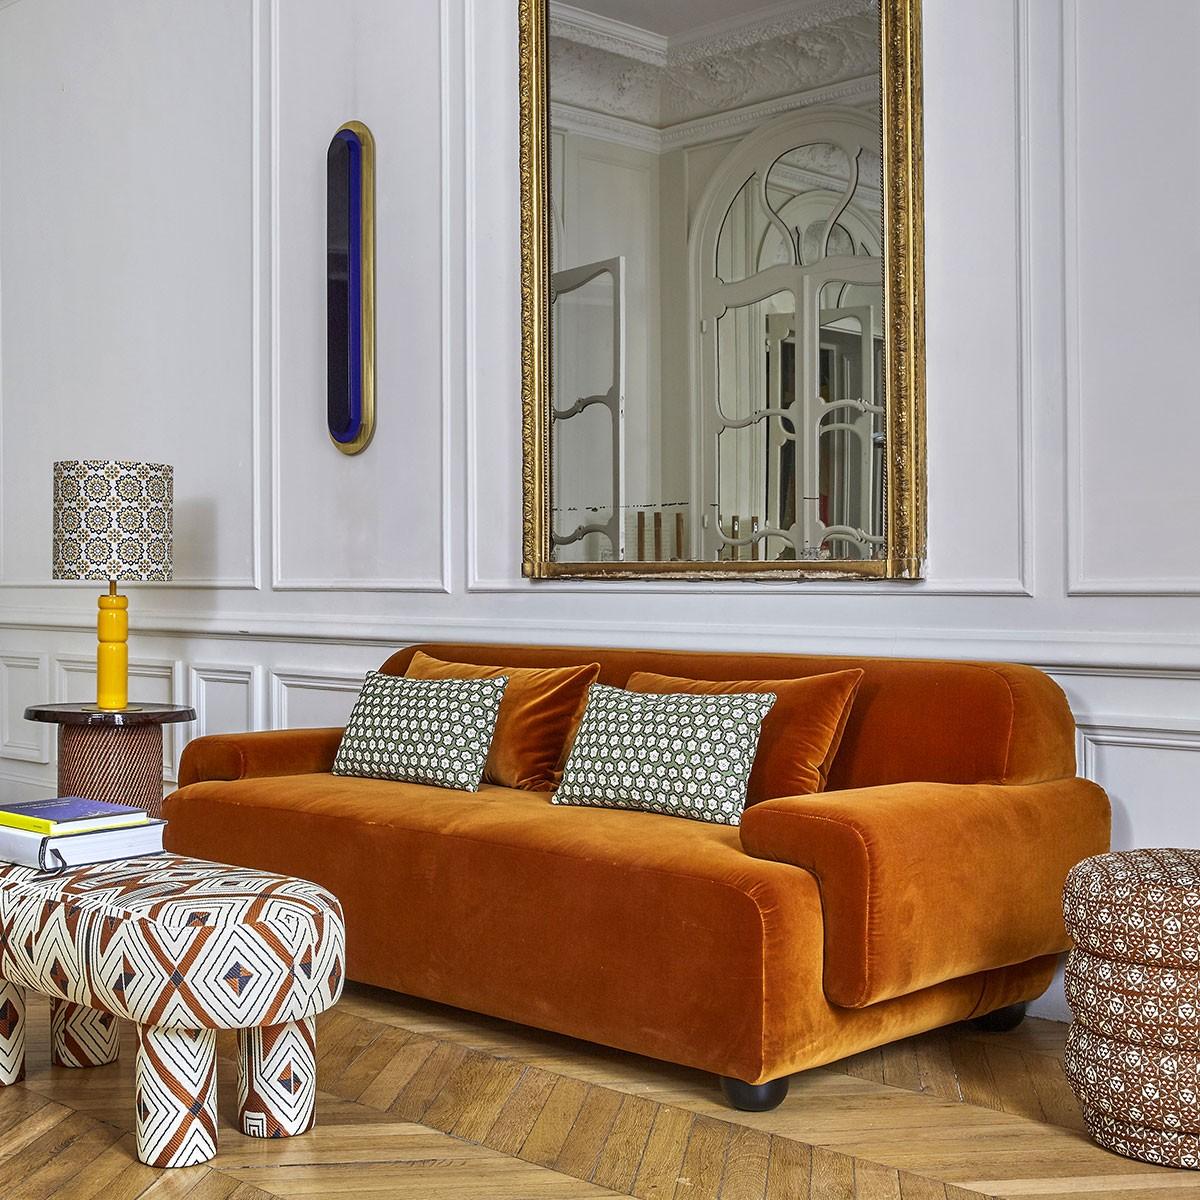 Popus Editions Lena 3 seater sofa in ocher london linen fabric

It looks like it's straight out of a movie, with its generous curves and wide armrests. It is a real invitation to spend long Sundays with the family, comfortably seated in front of a